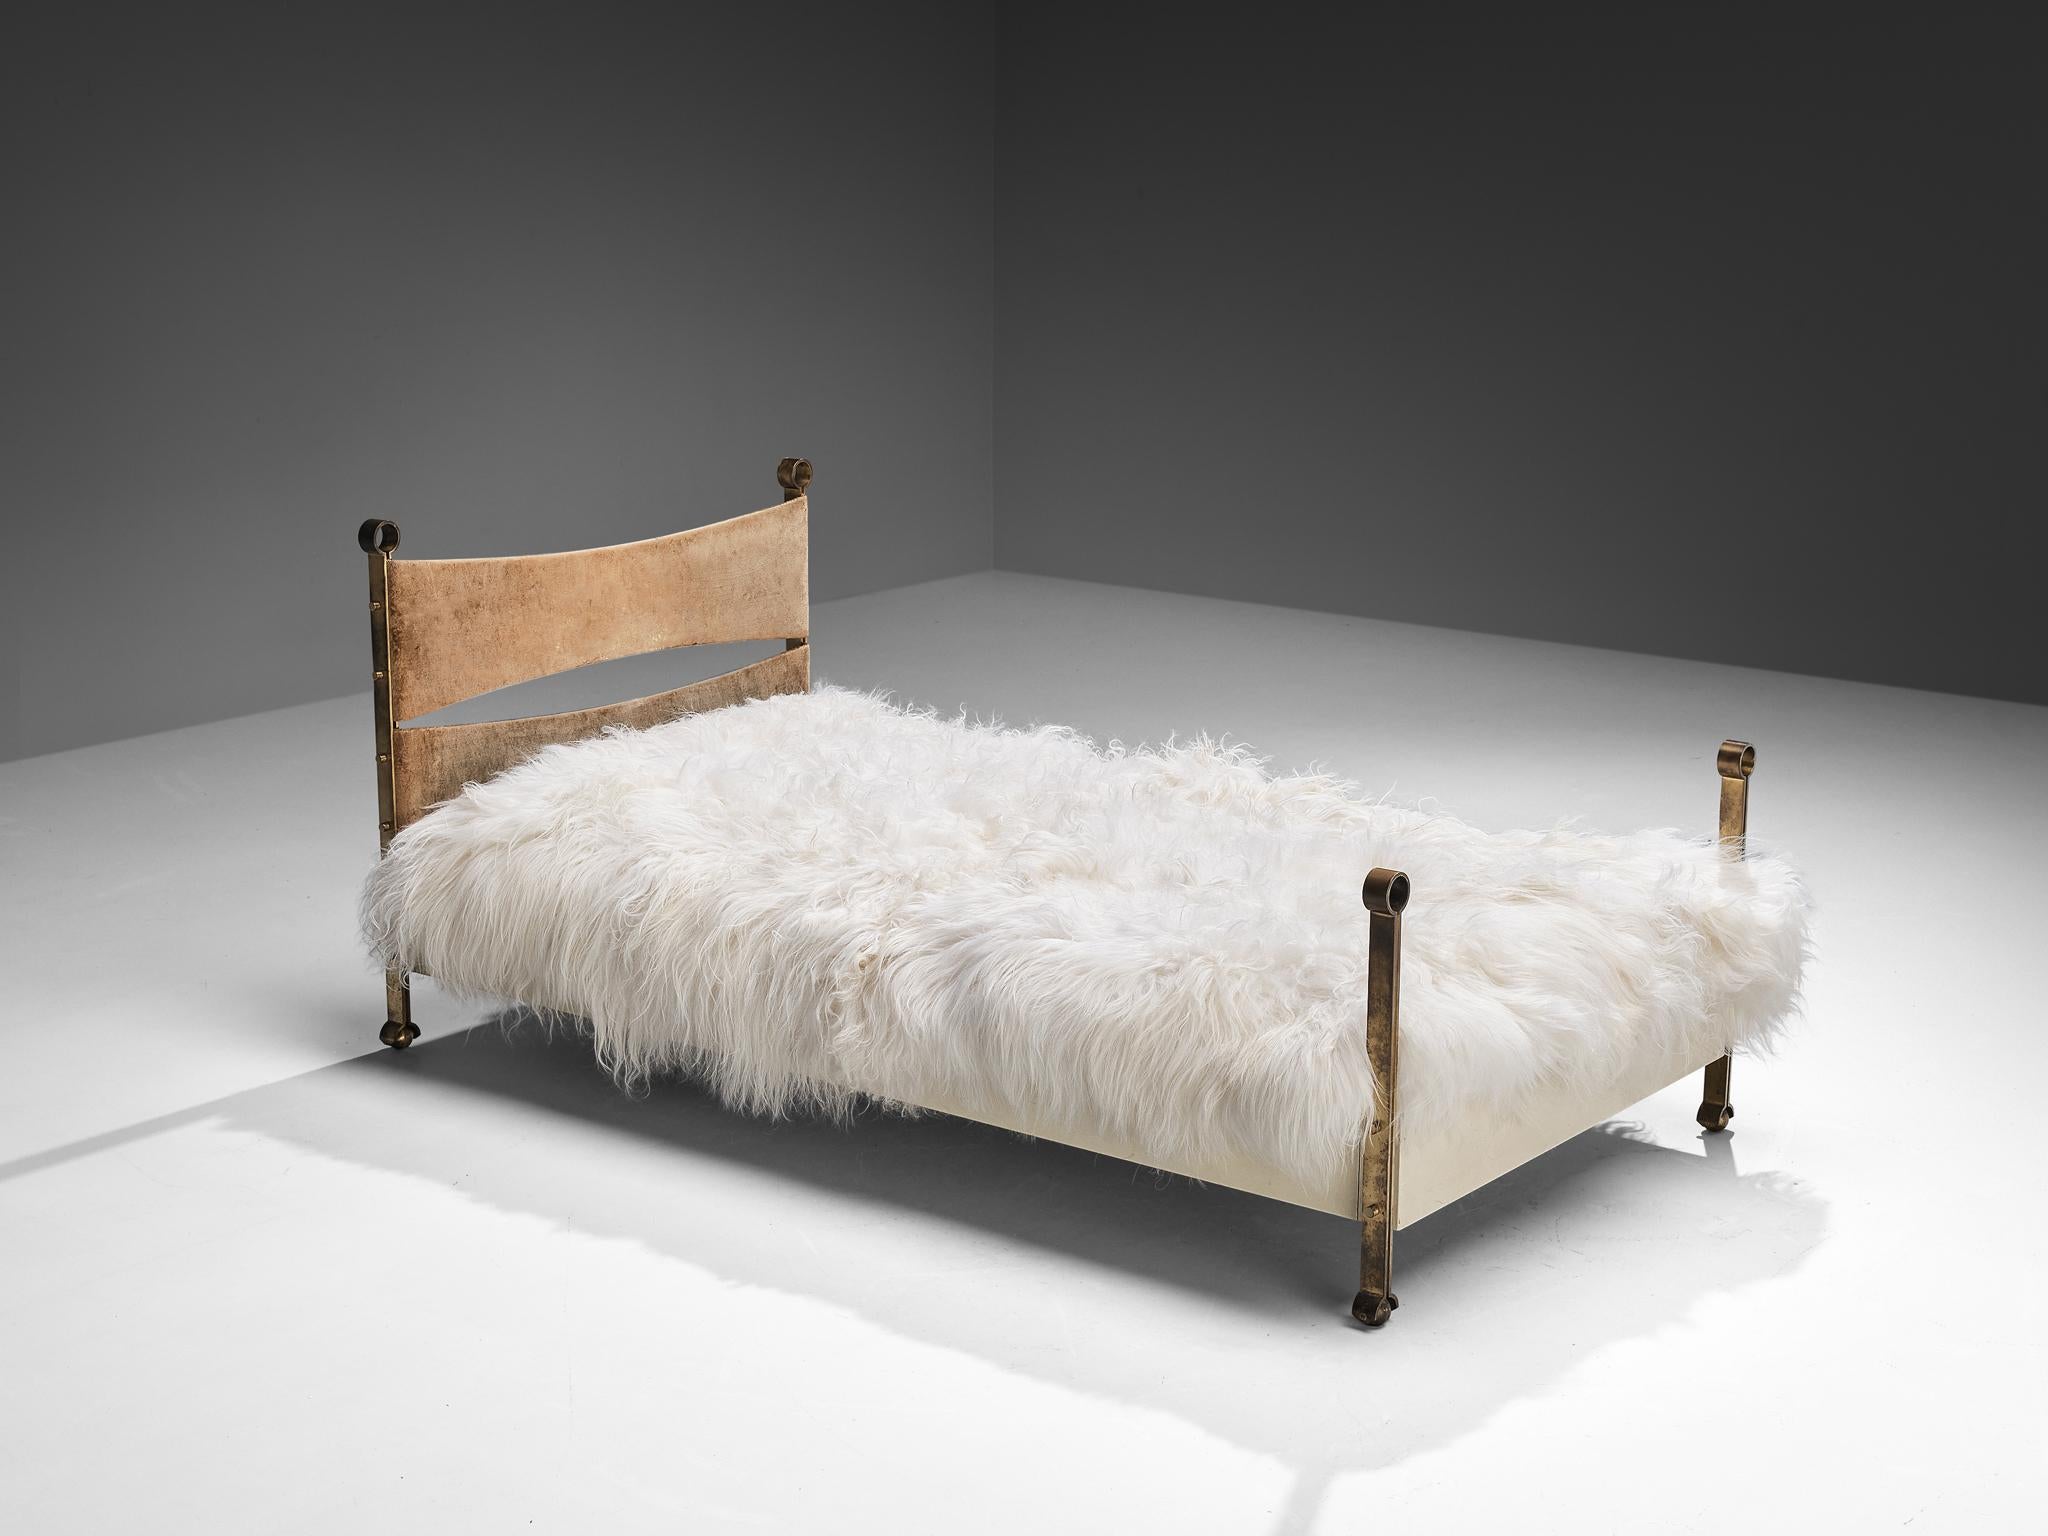 Osvaldo Borsani, single bed, model L79, brass, lacquered wood, fabric, Italy, 1963. 

This eccentric single bed is designed by Osvaldo Borsani and embodies a splendid construction of subtle lines and curvaceous shapes. Remarkable detail and the